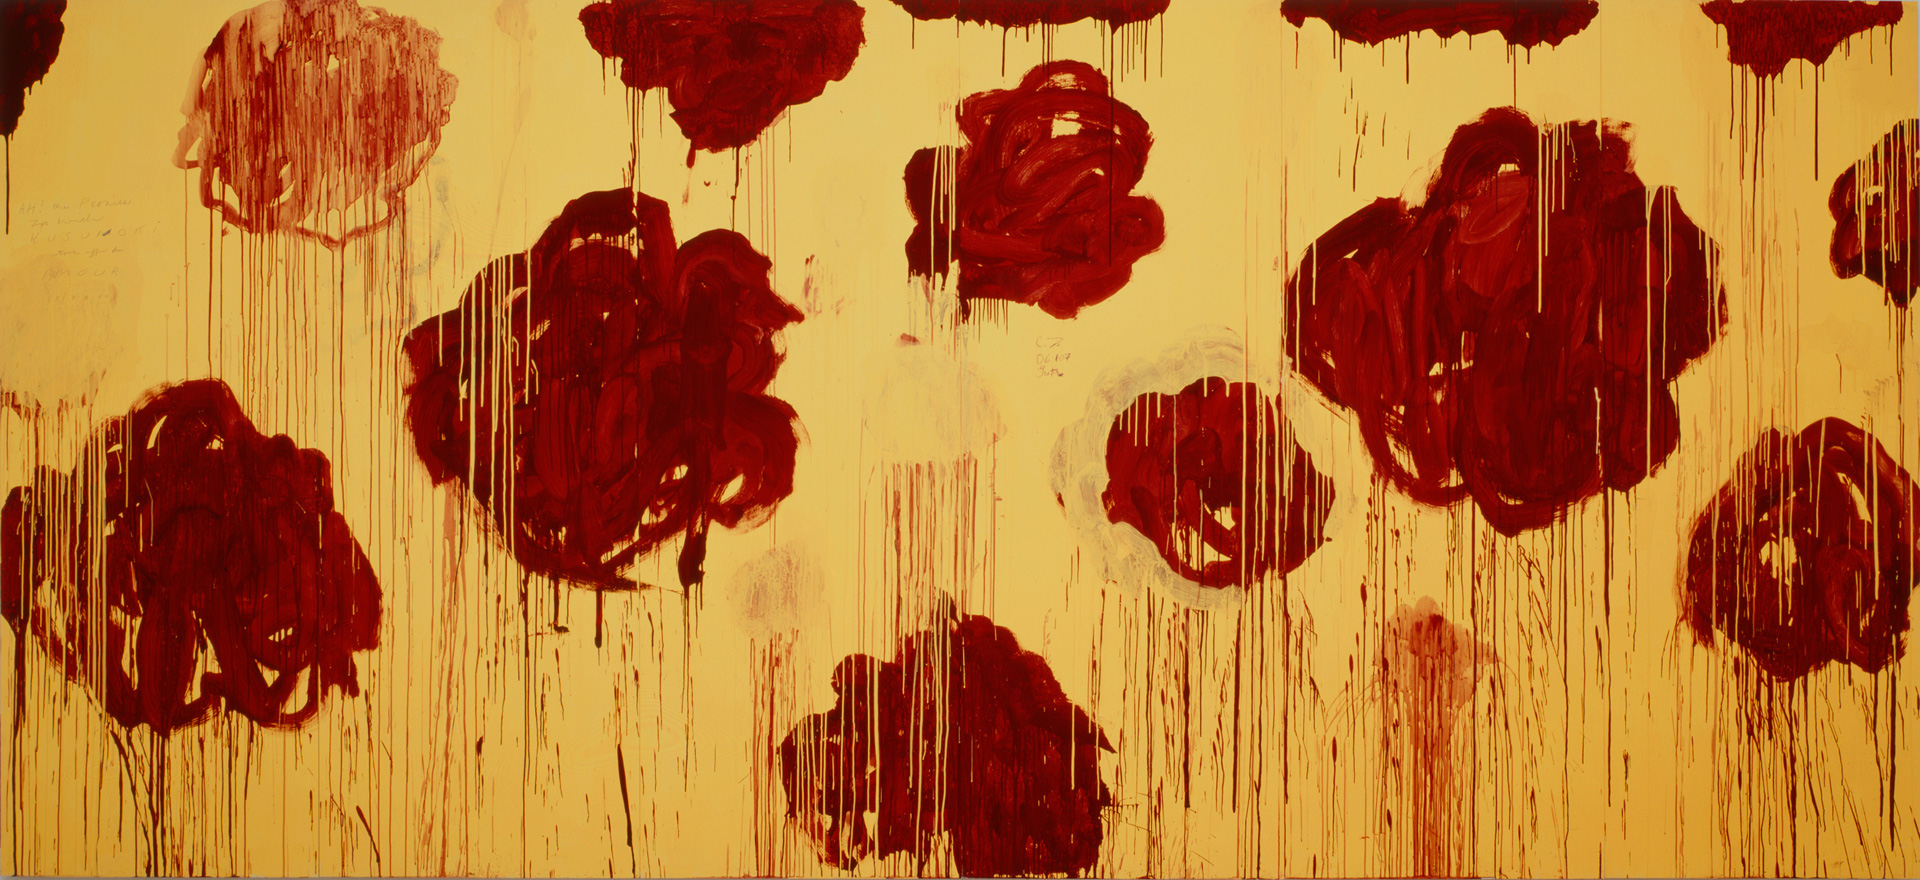 Cy Twombly - Untitled [Gaeta], 2007, acrylic, wax crayon, lead pencil on wooden panel 